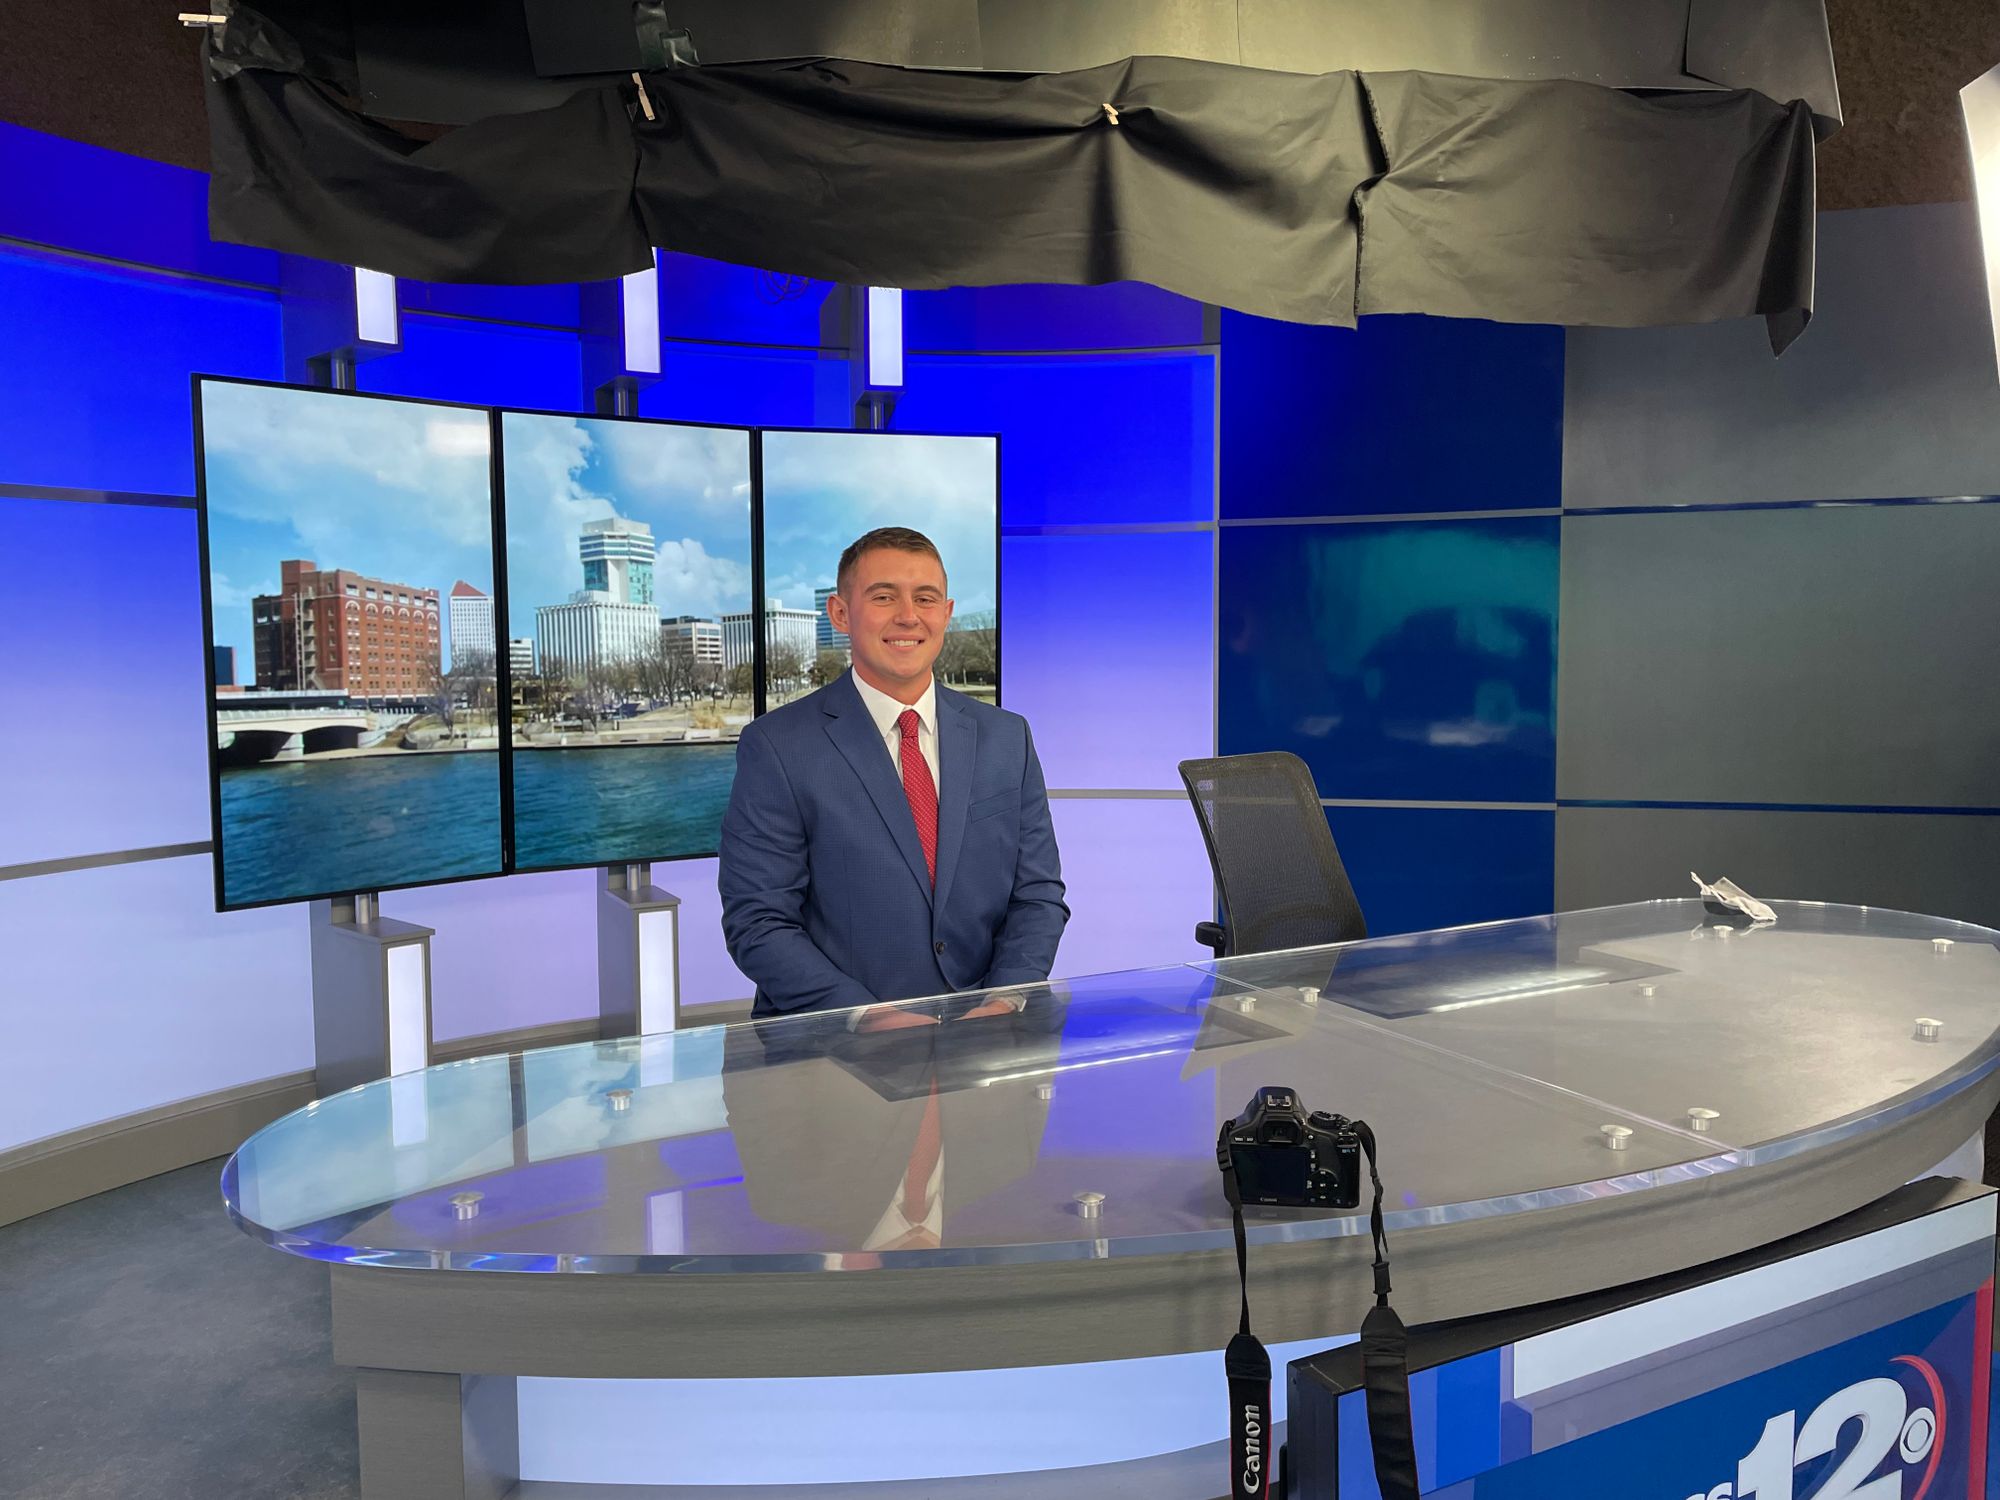 Vantage Editor-In-Chief Tejay Cleland joins KWCH TV